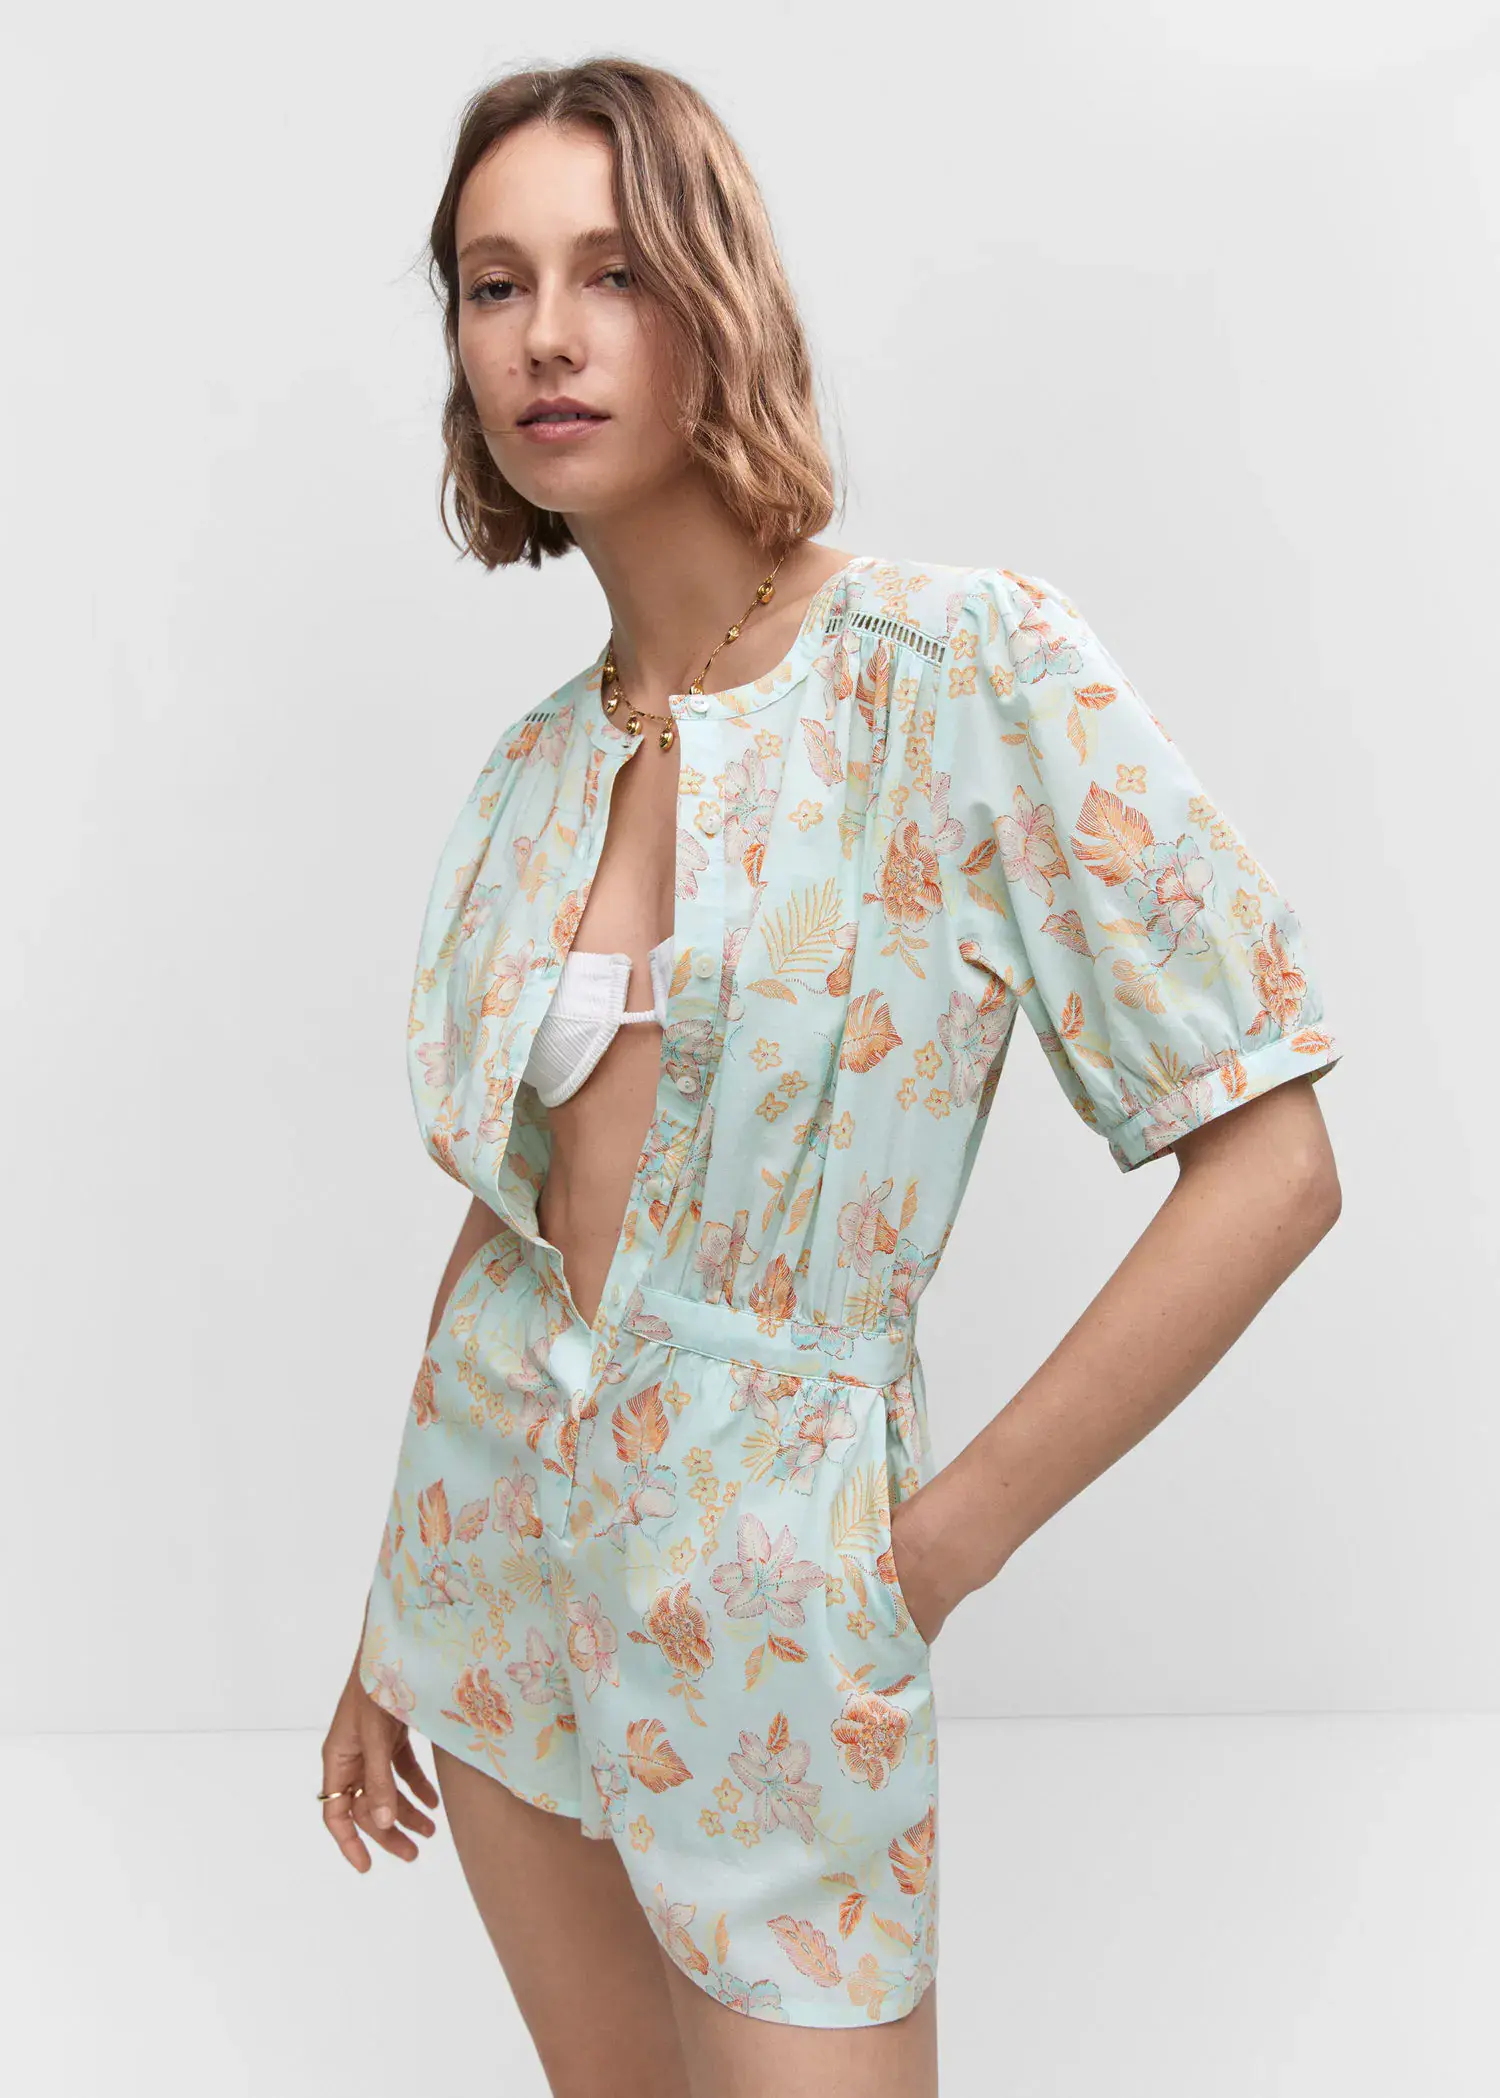 Mango Floral short jumpsuit. a woman in a floral print dress standing next to a white wall. 